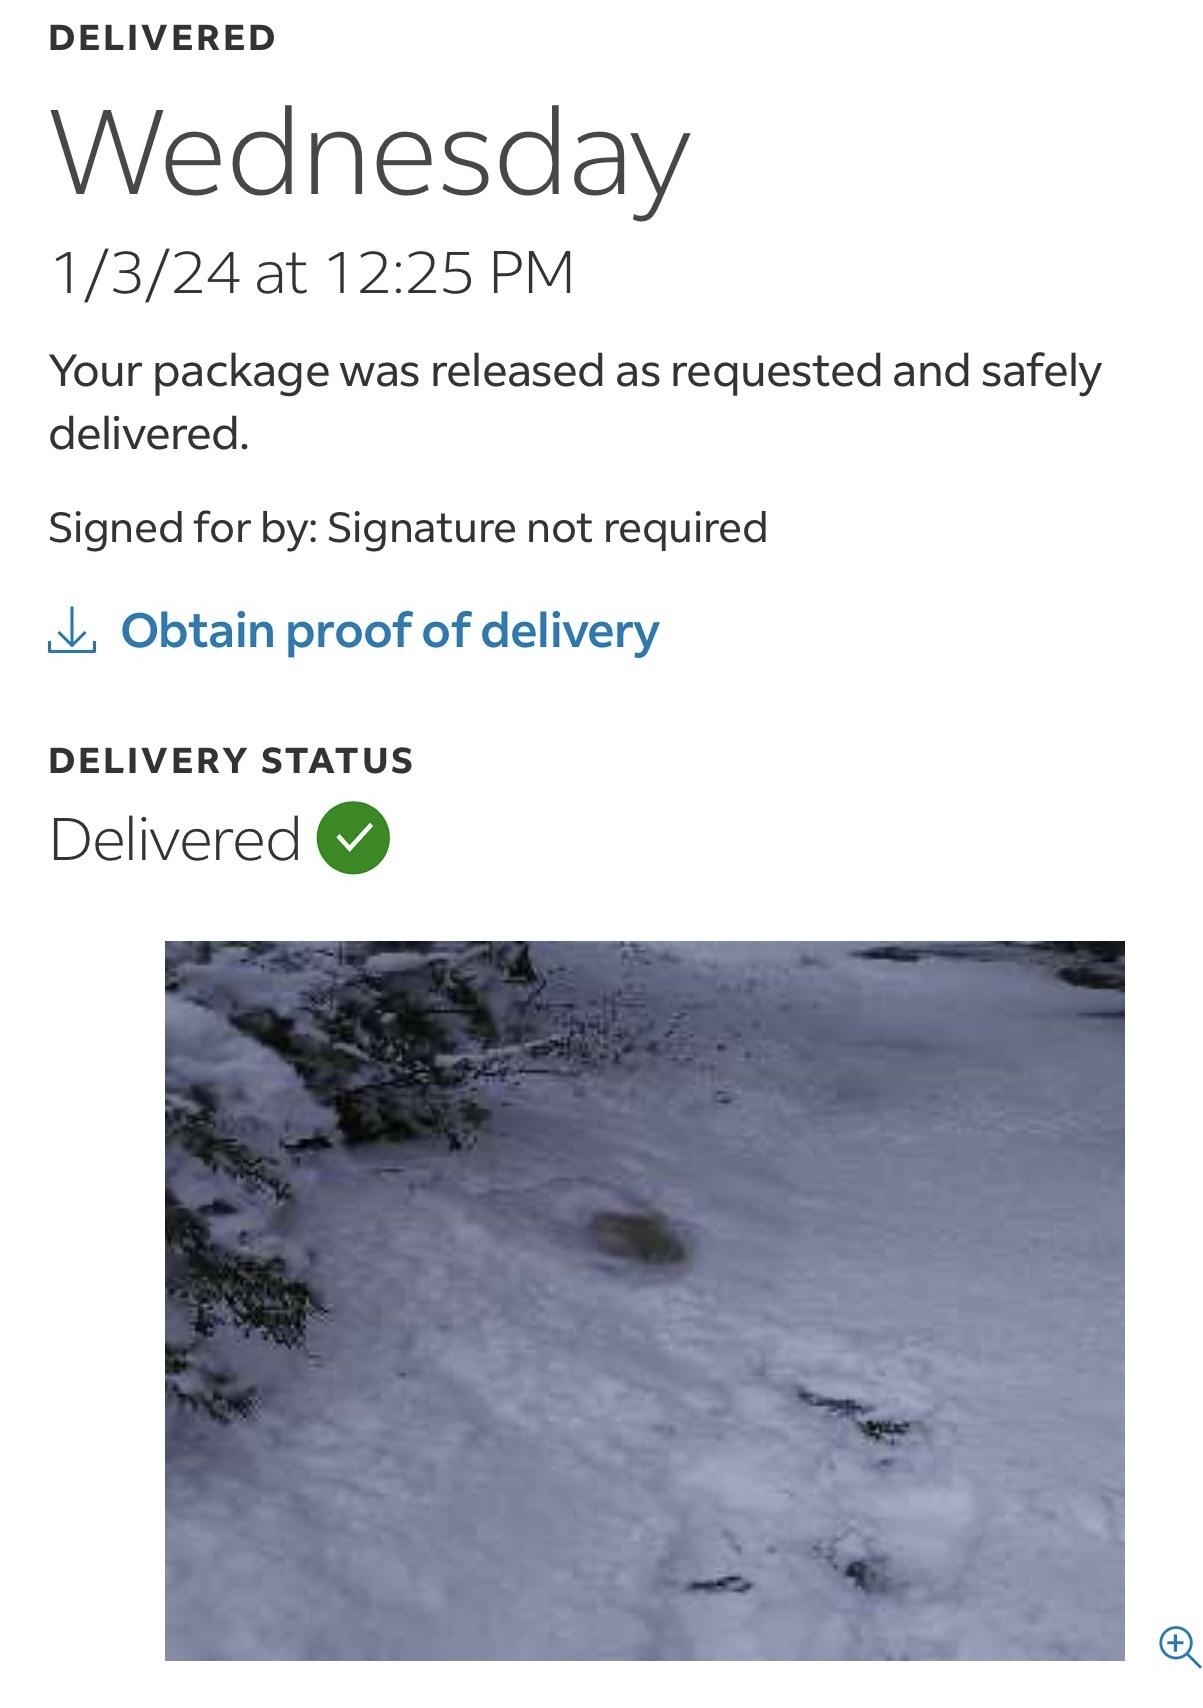 A notification of a package having been delivered, with a photo of a snowy scene and no visible package accompanying it